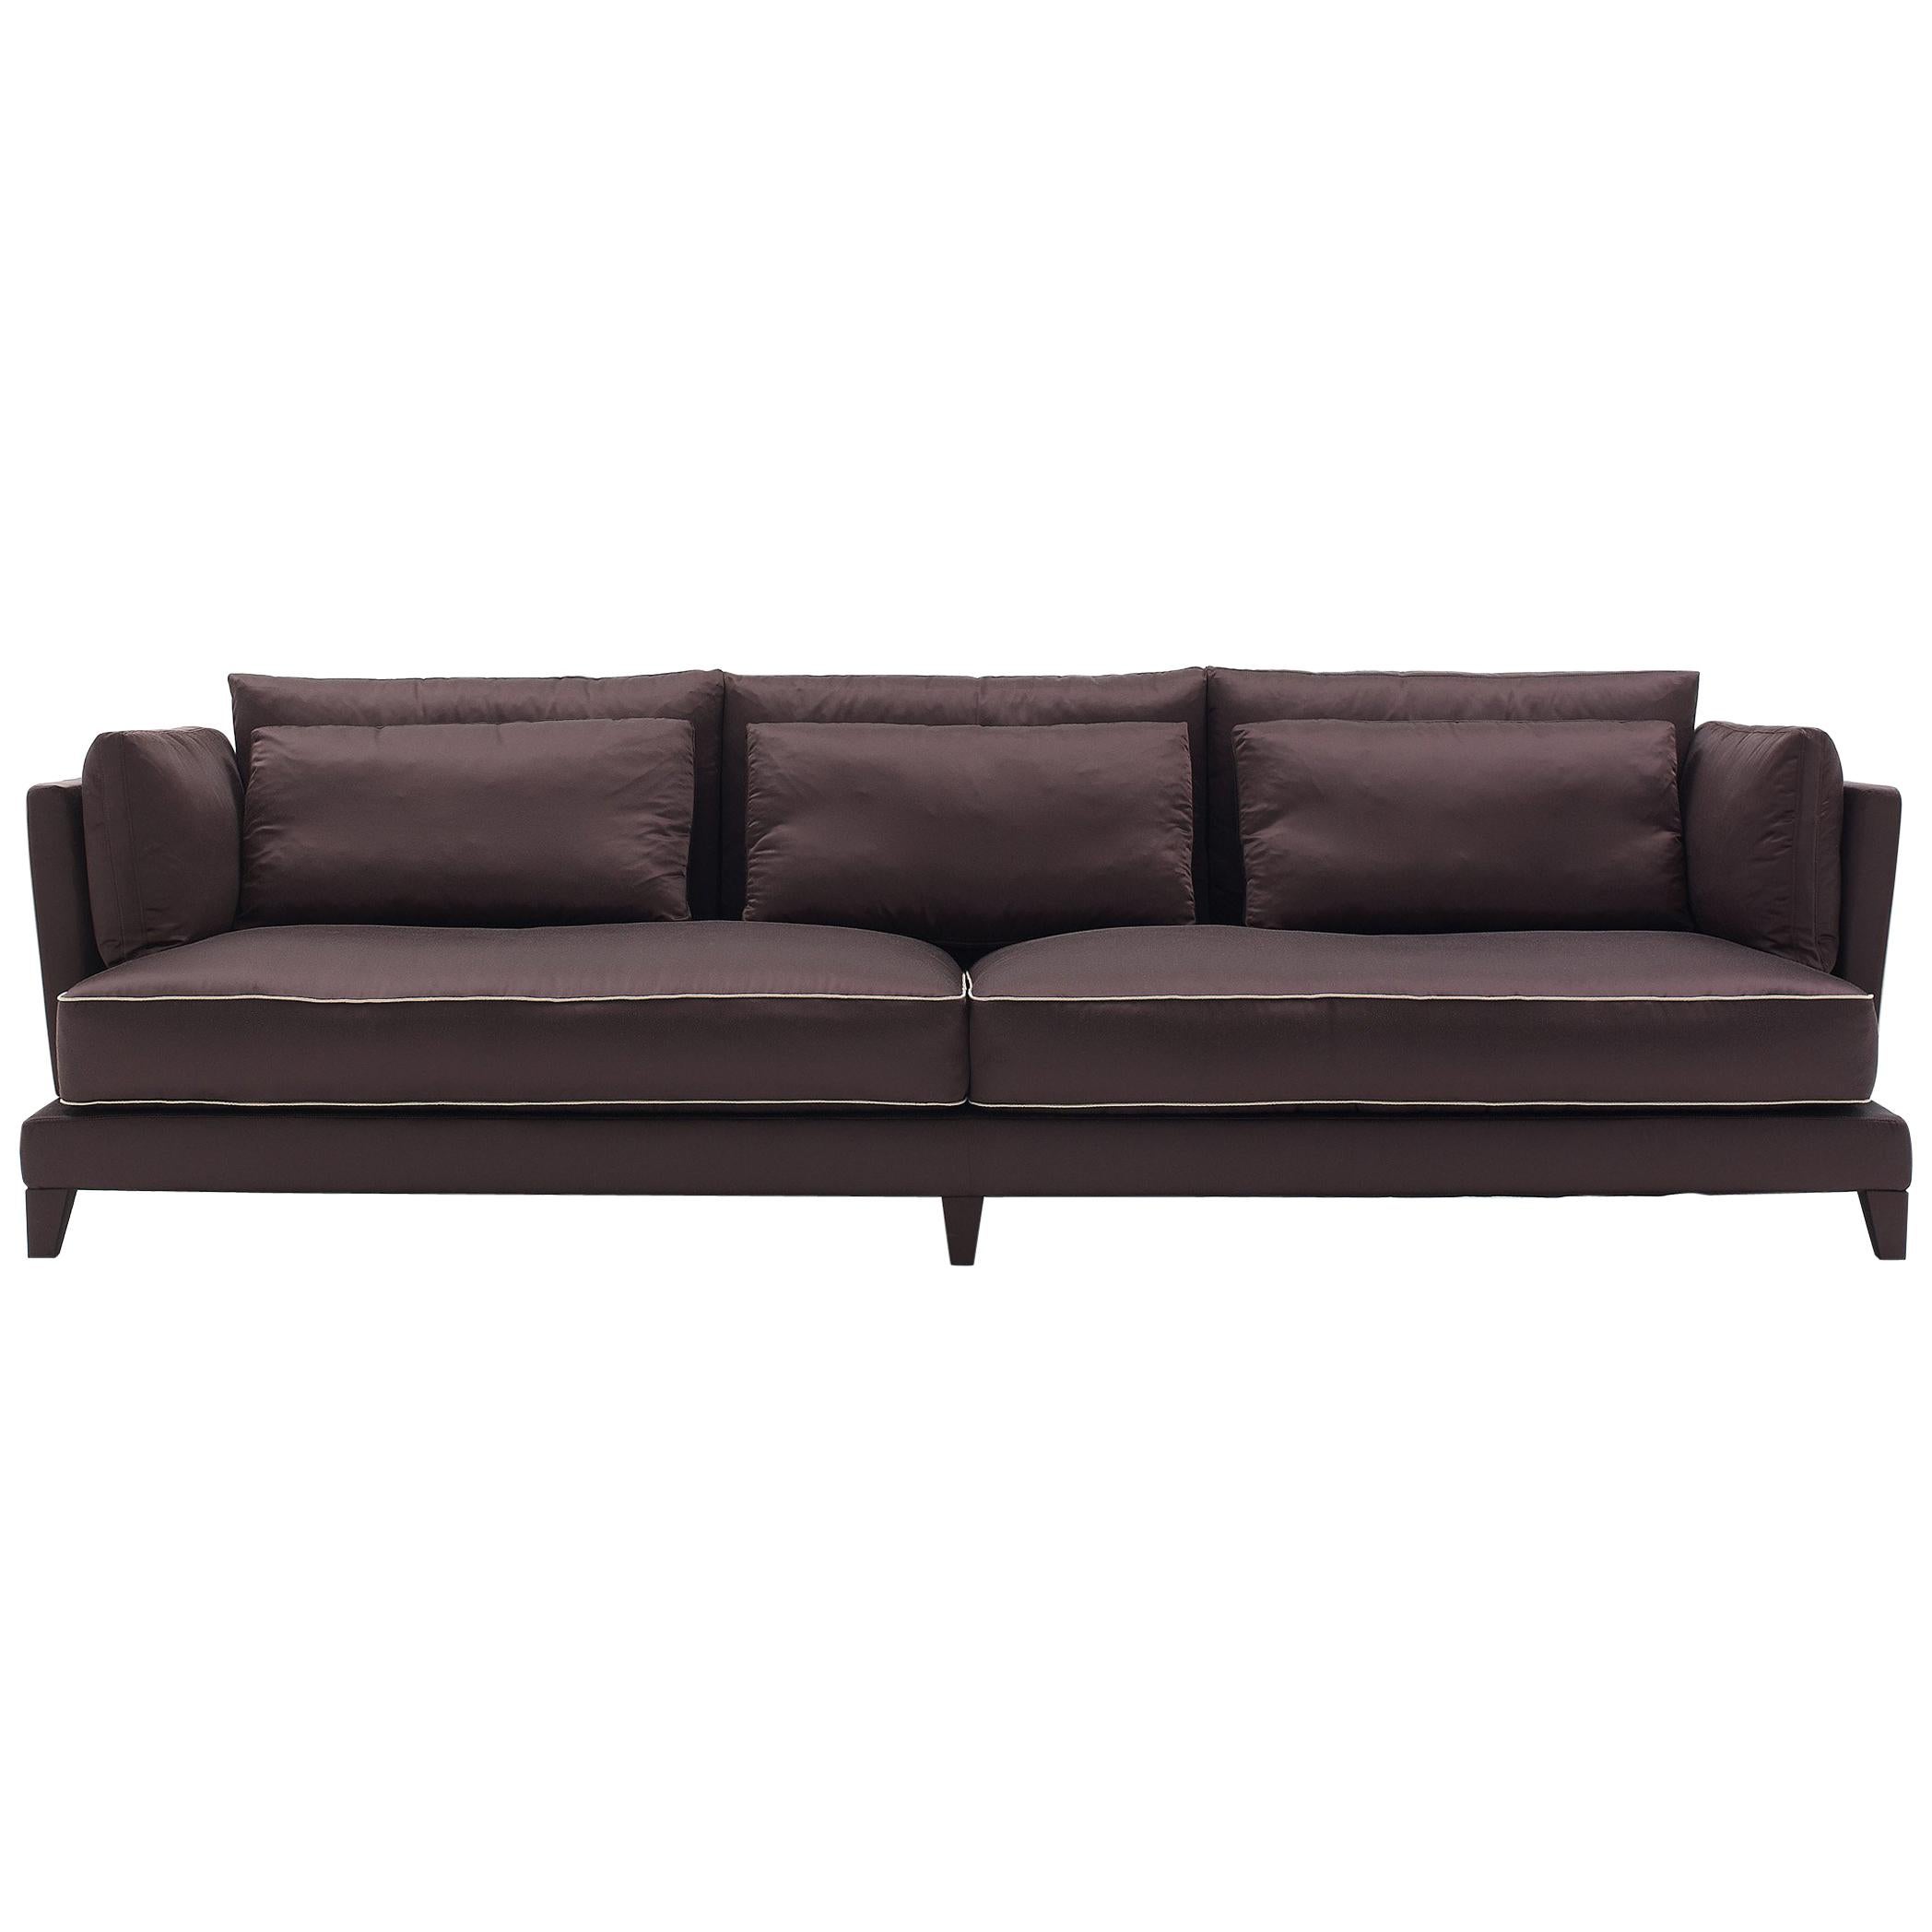 Nube Italia Harbour Sofa in Chocolate Upholstery by Marco Corti For Sale